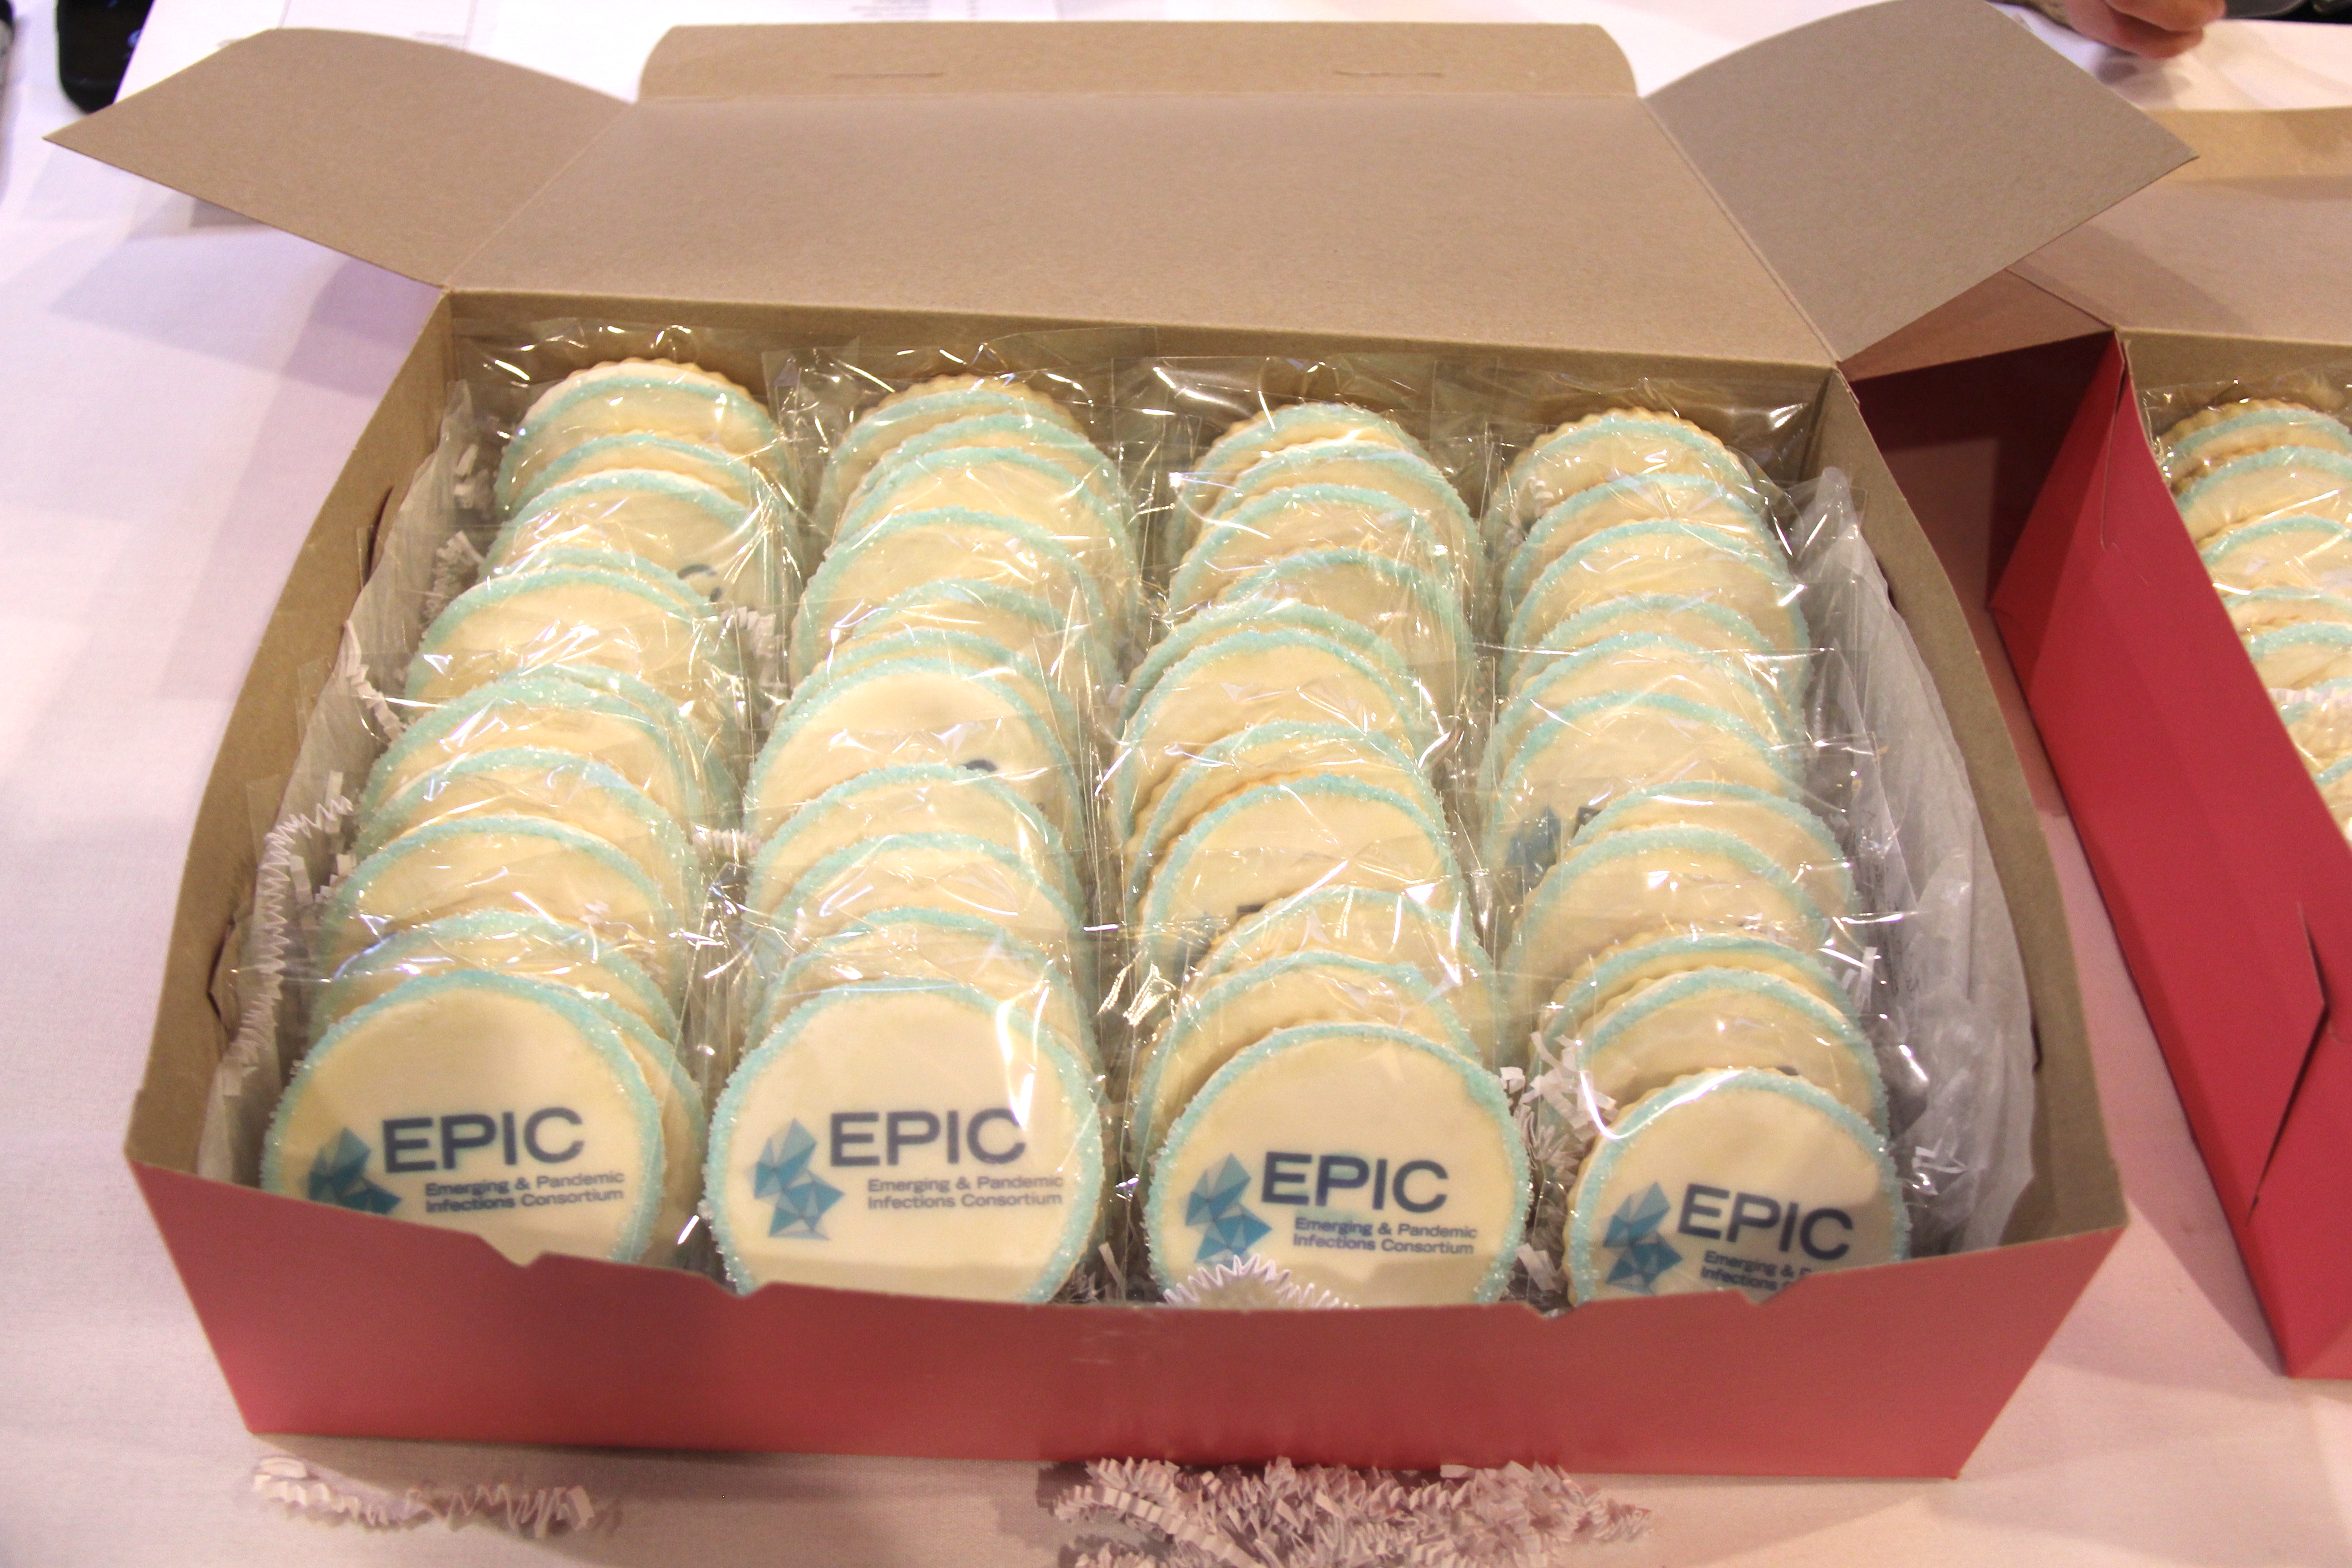 A box of cookies with the EPIC logo